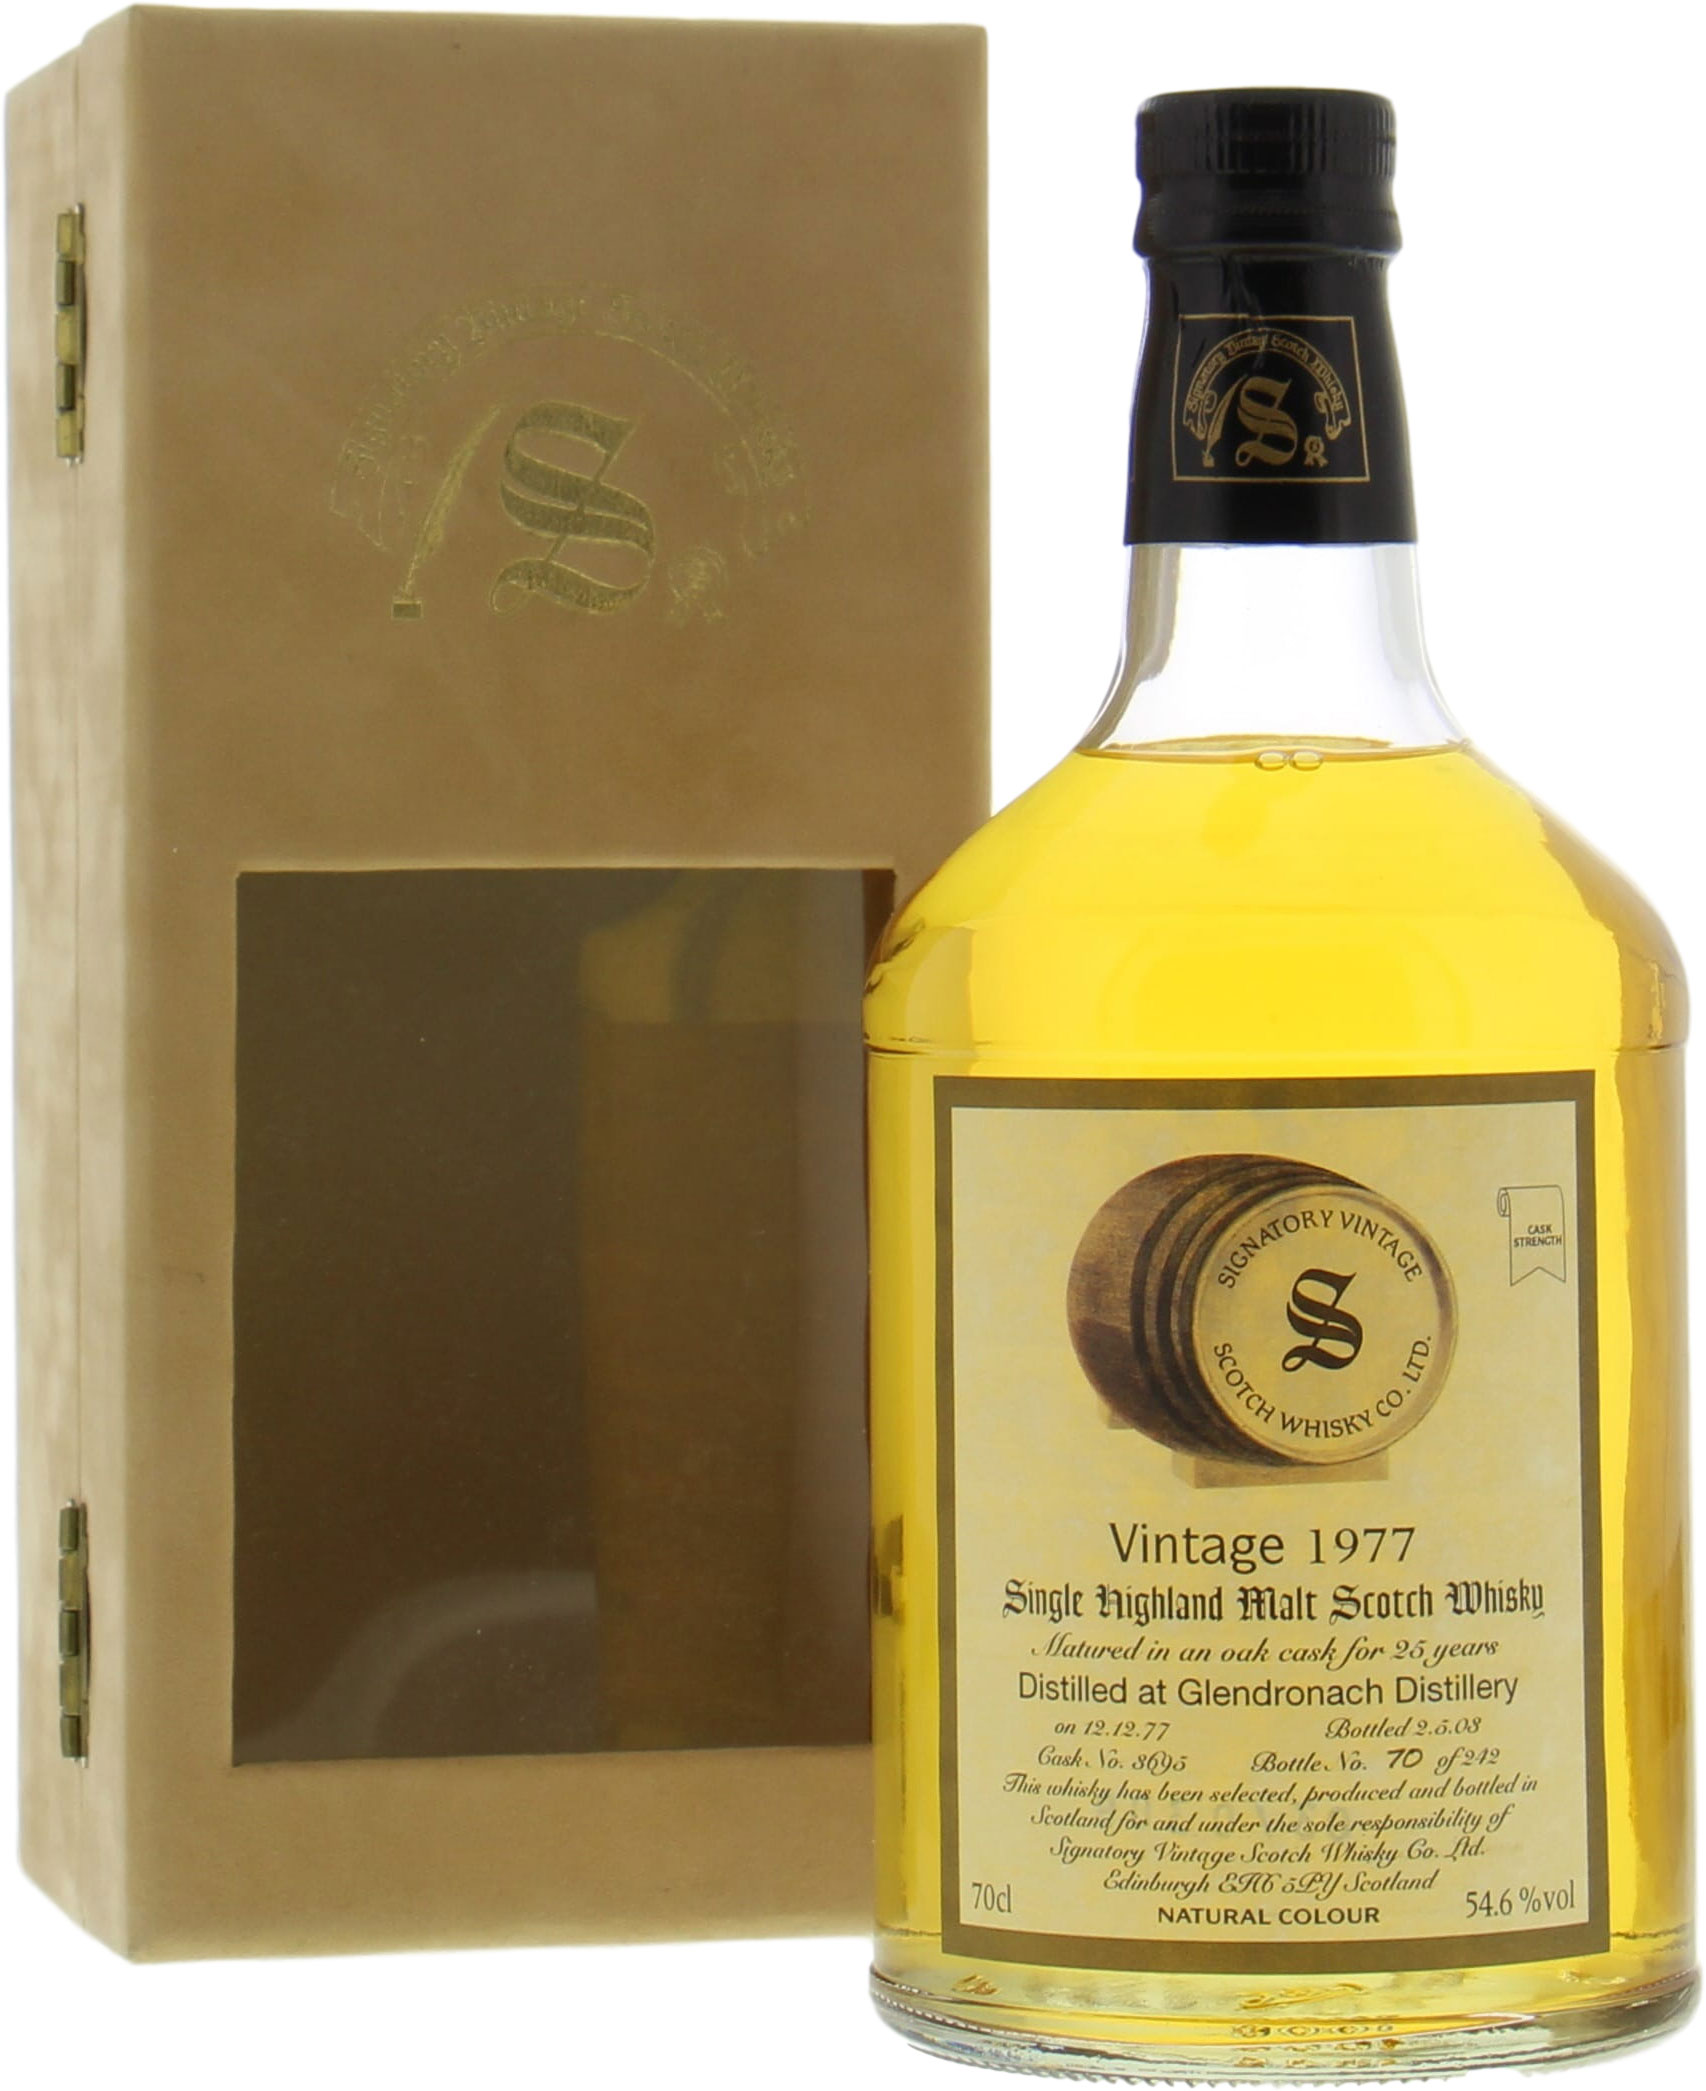 Glendronach - 1977 Signatory Vintage 25 Years Cask 3695 54.6% 1977 In Original Container